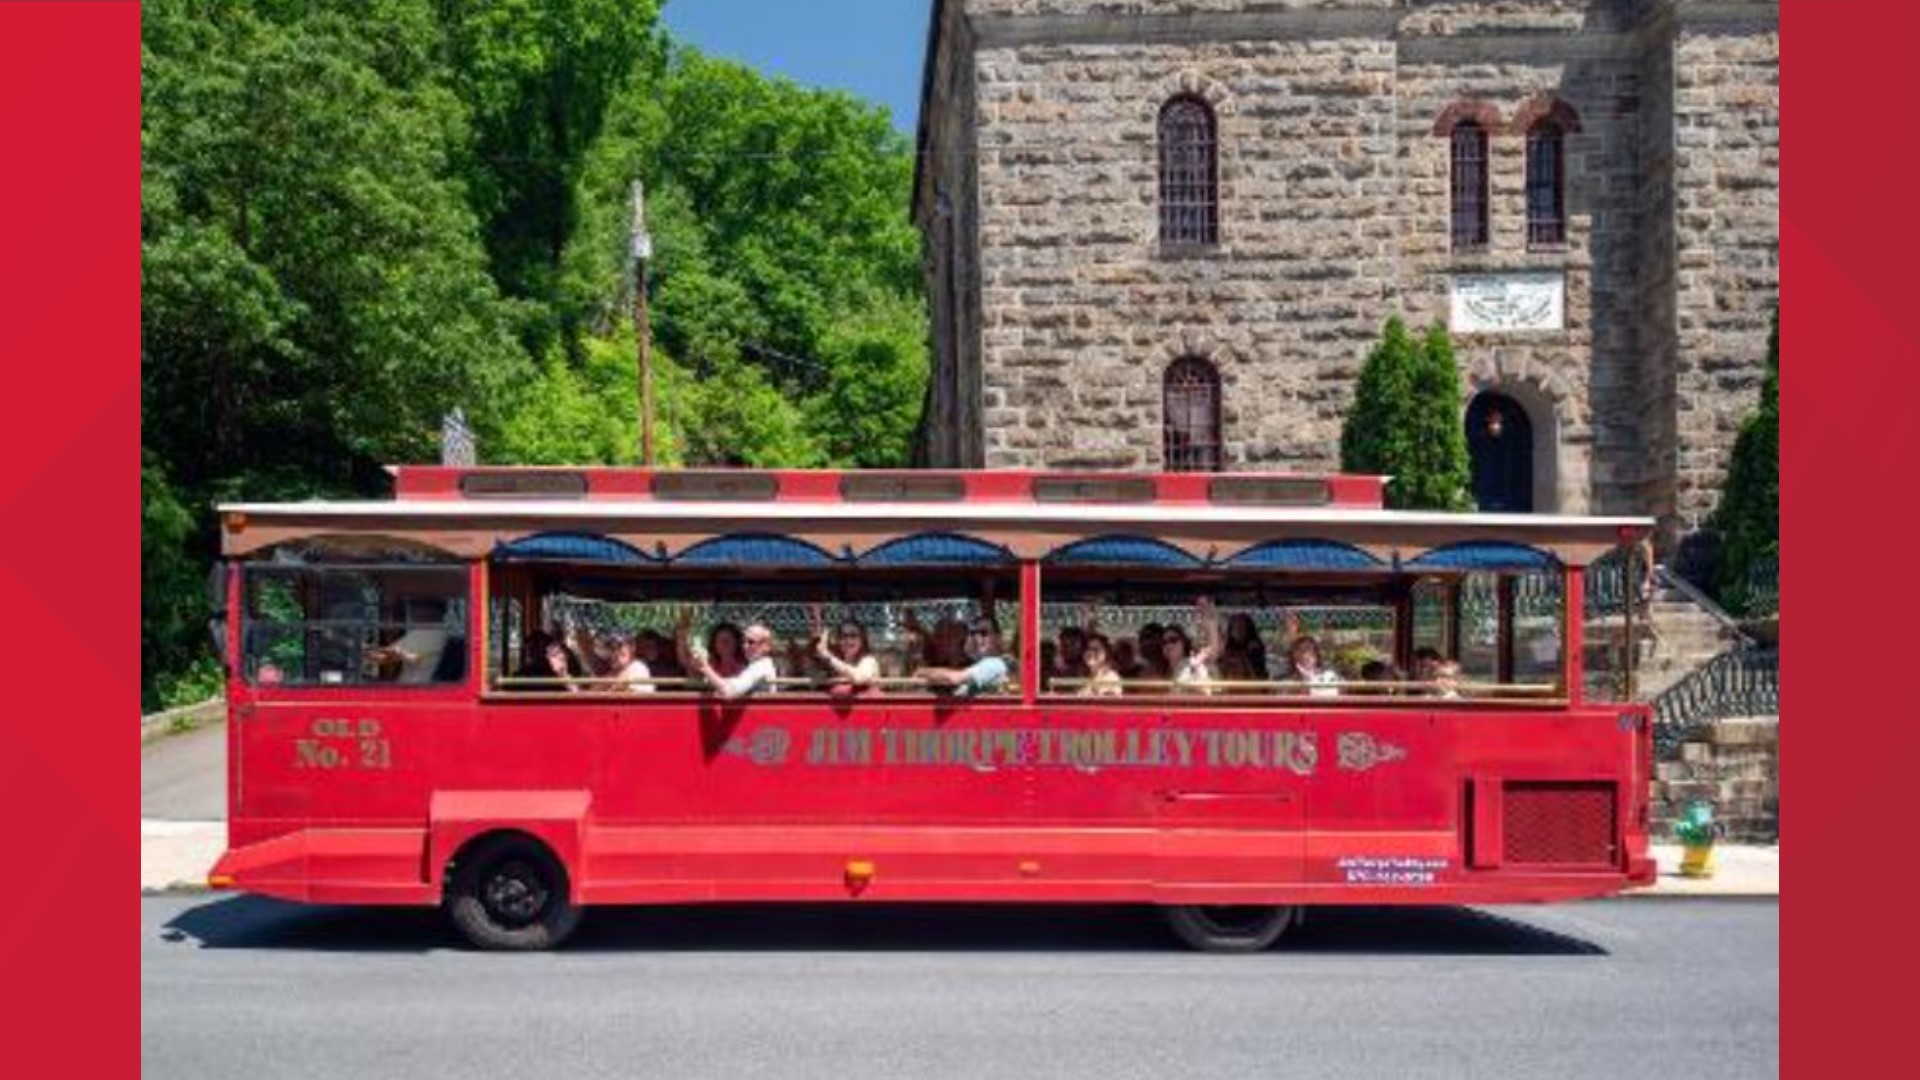 A brand new summertime attraction is cruising the streets in one Carbon County community. Newswatch 16's Ryan Leckey checked out Jim Thorpe's new trolley tour.